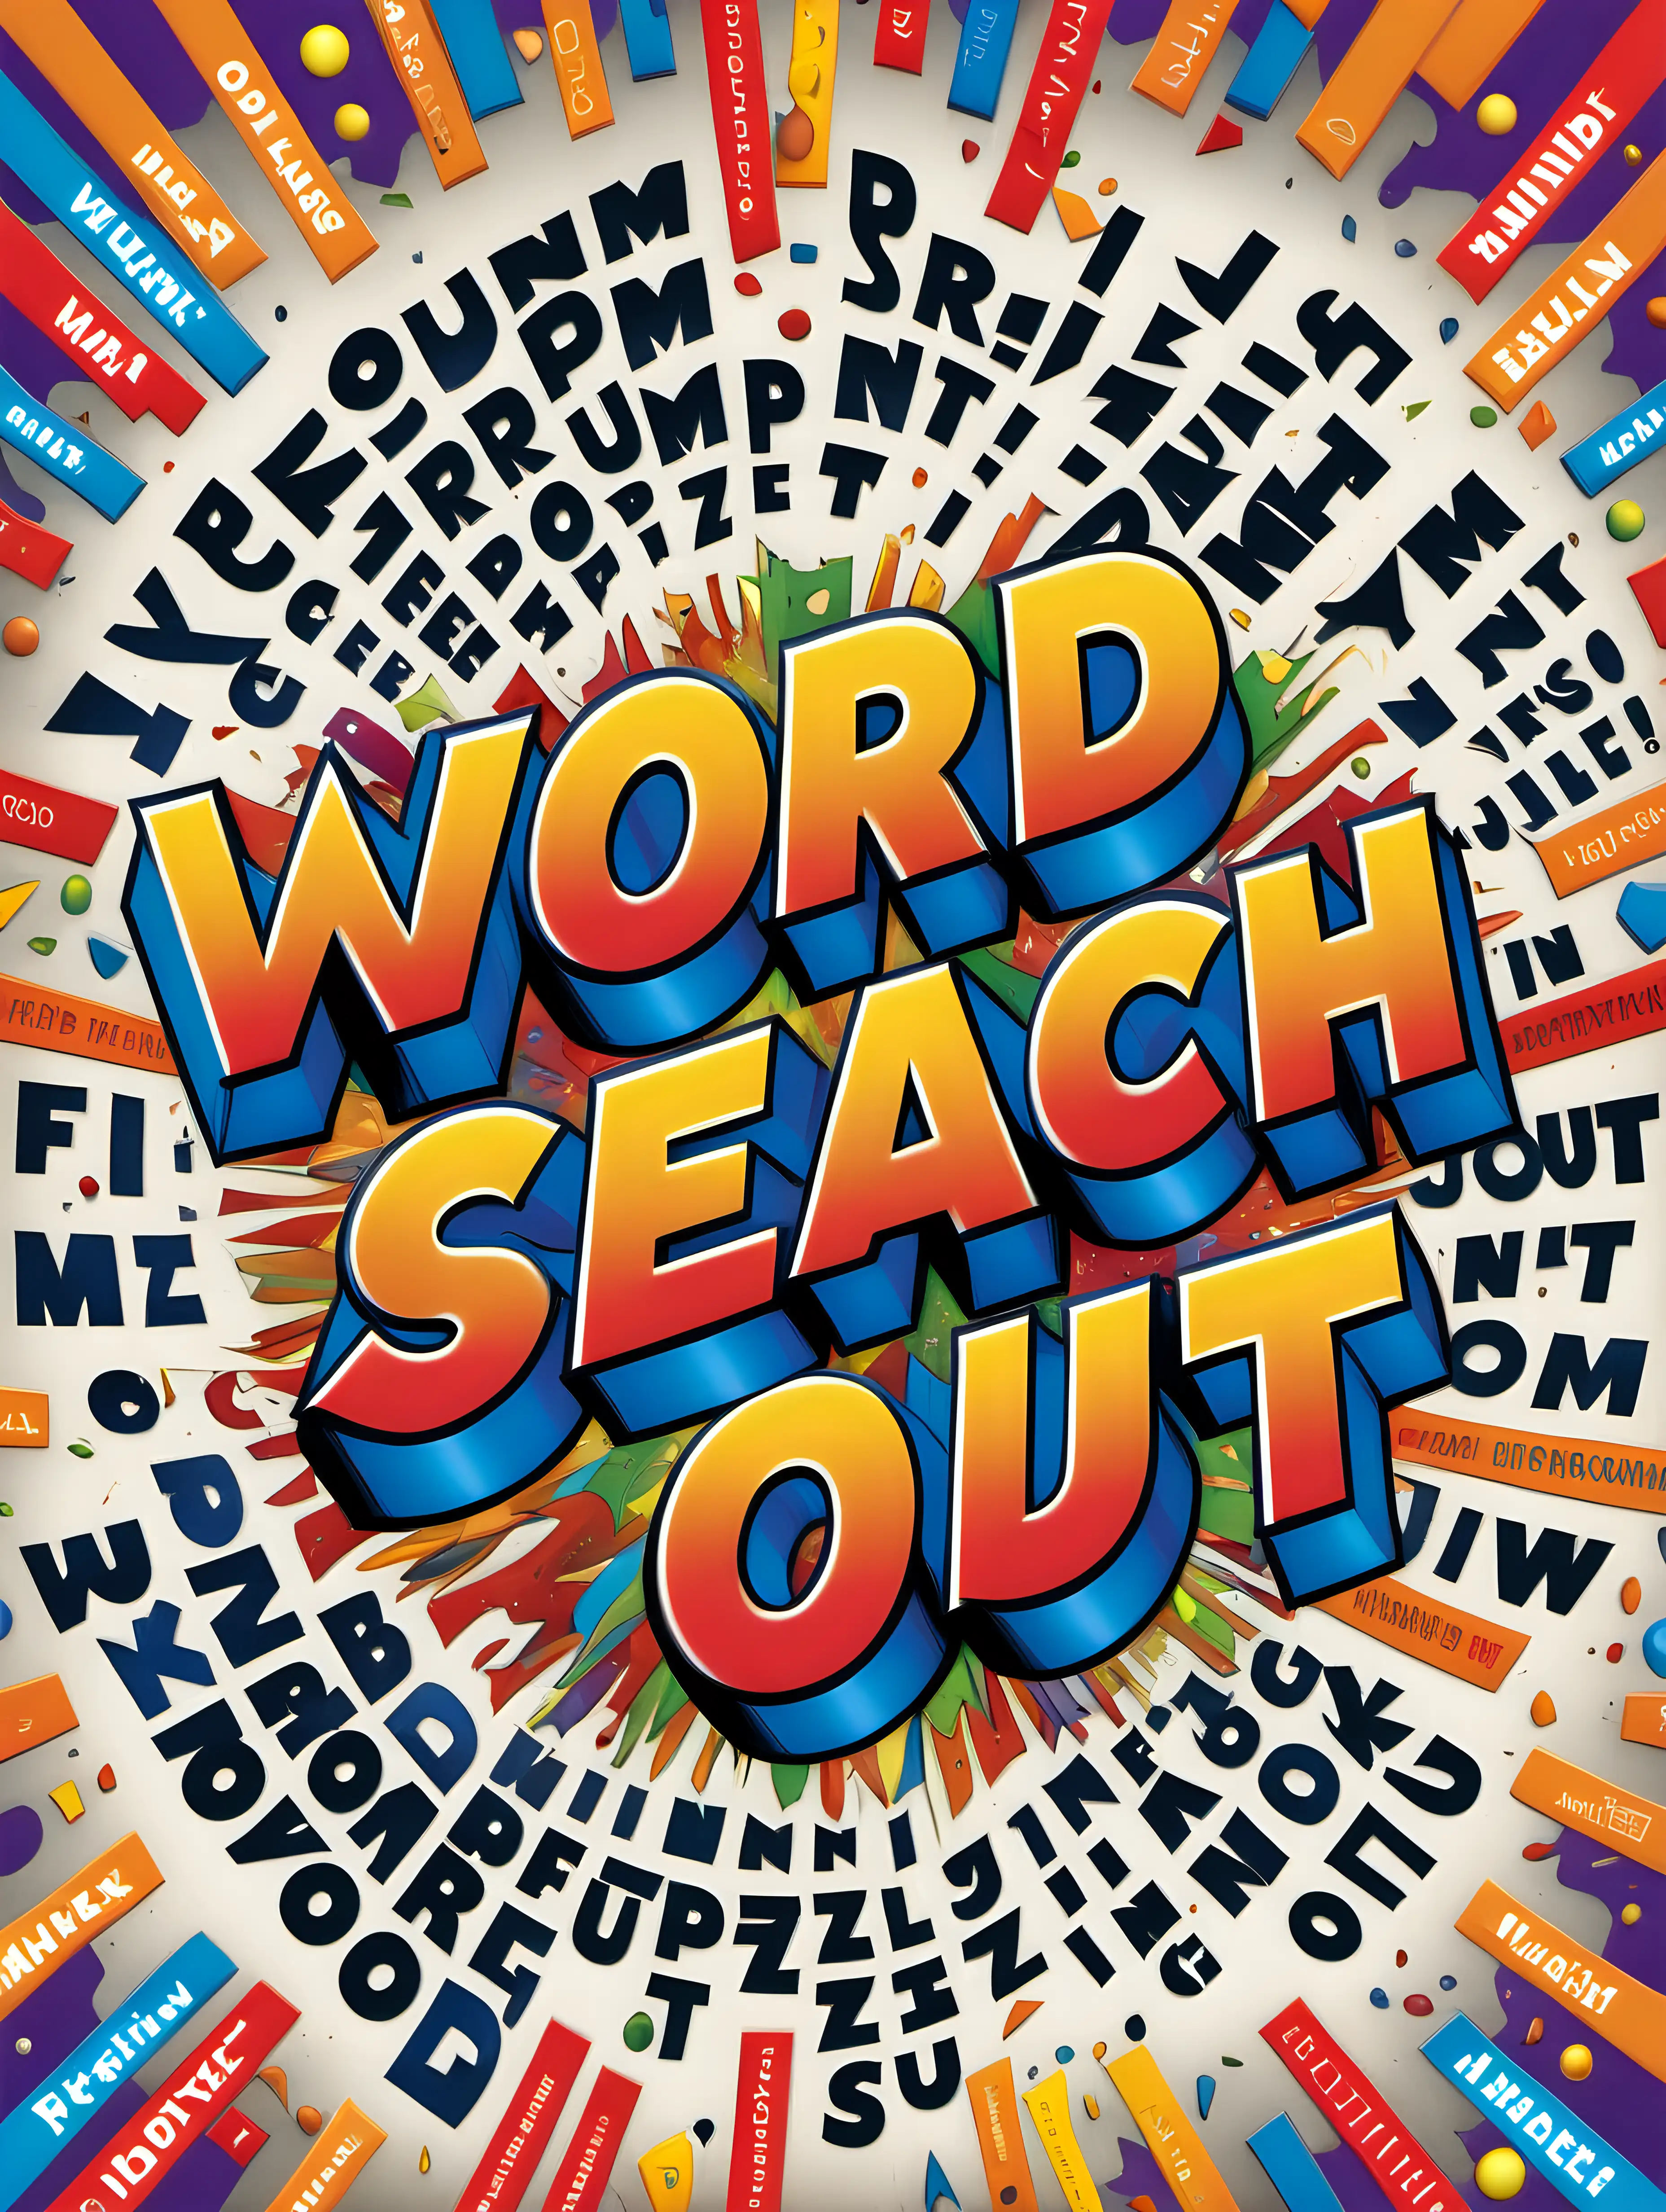 A dynamic composition featuring a jumble of letters exploding outward from the center of the cover, with words from the title "Word Search Puzzle Book" jumping out in bold, colorful text, creating a sense of energy and excitement around the puzzle-solving experience.